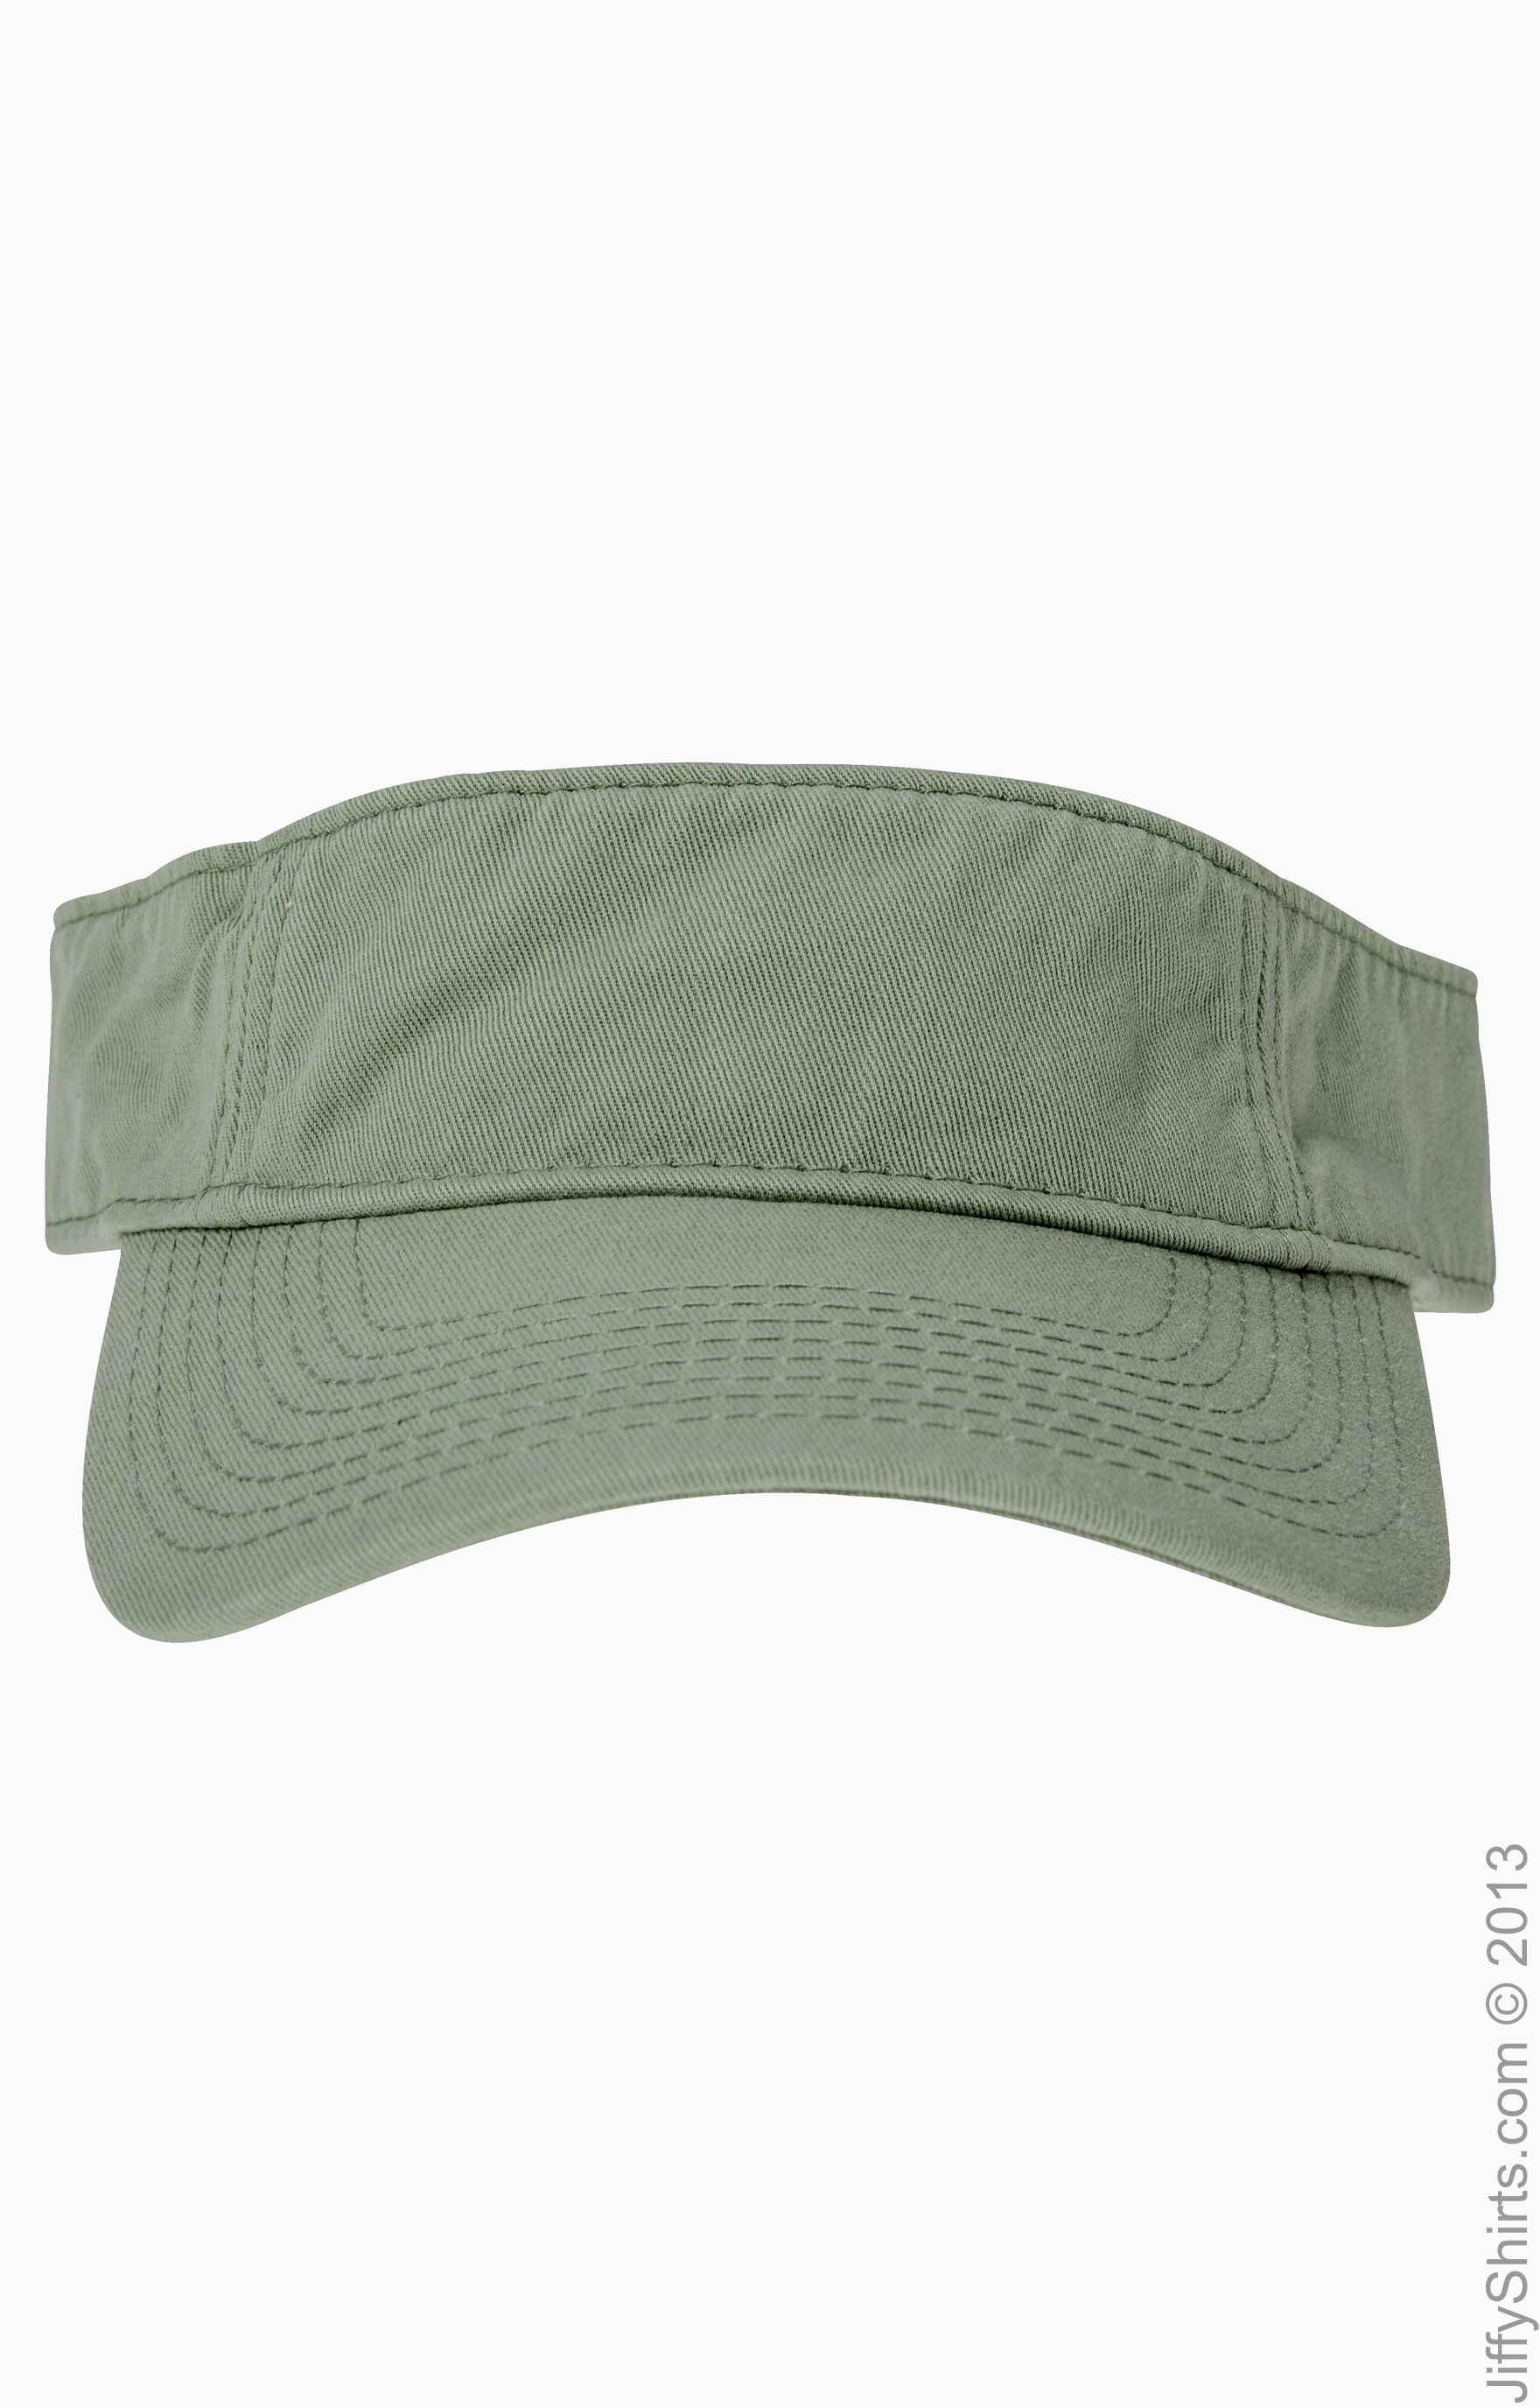 Authentic Pigment Direct-Dyed Twill Visor cilantro One Size 1915